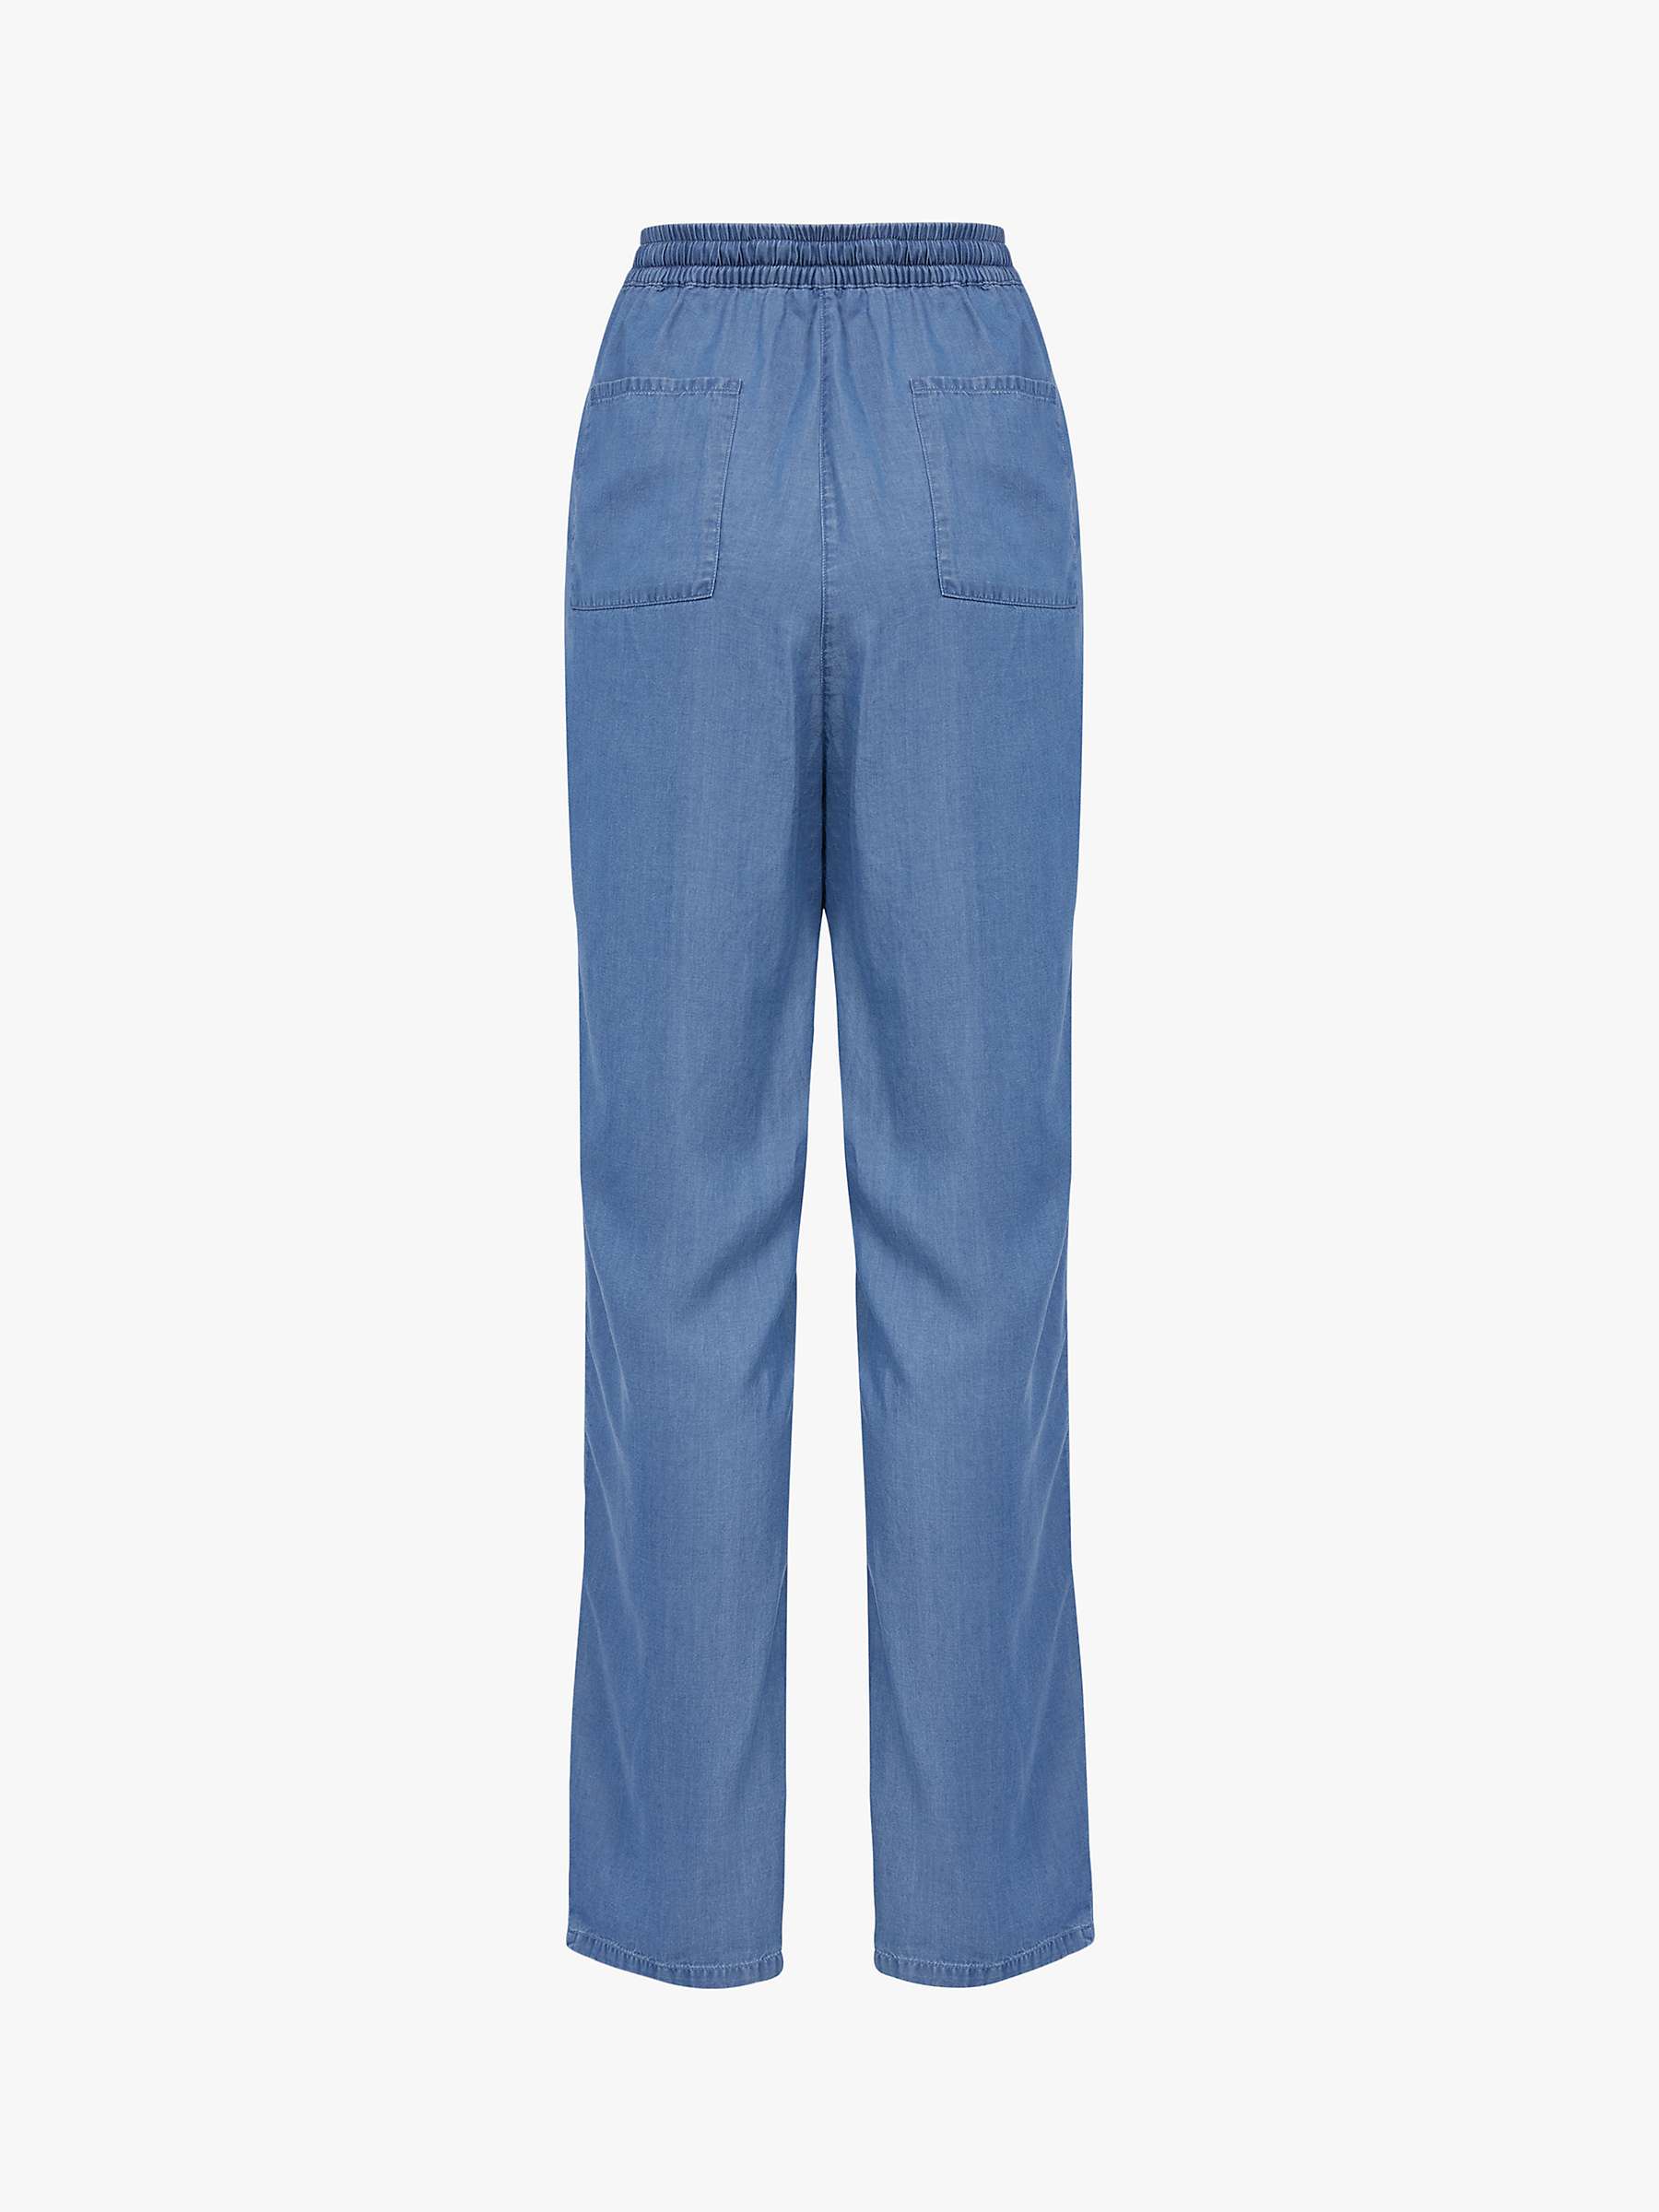 Celtic & Co. Chambray Joggers, Vintage Blue at John Lewis & Partners